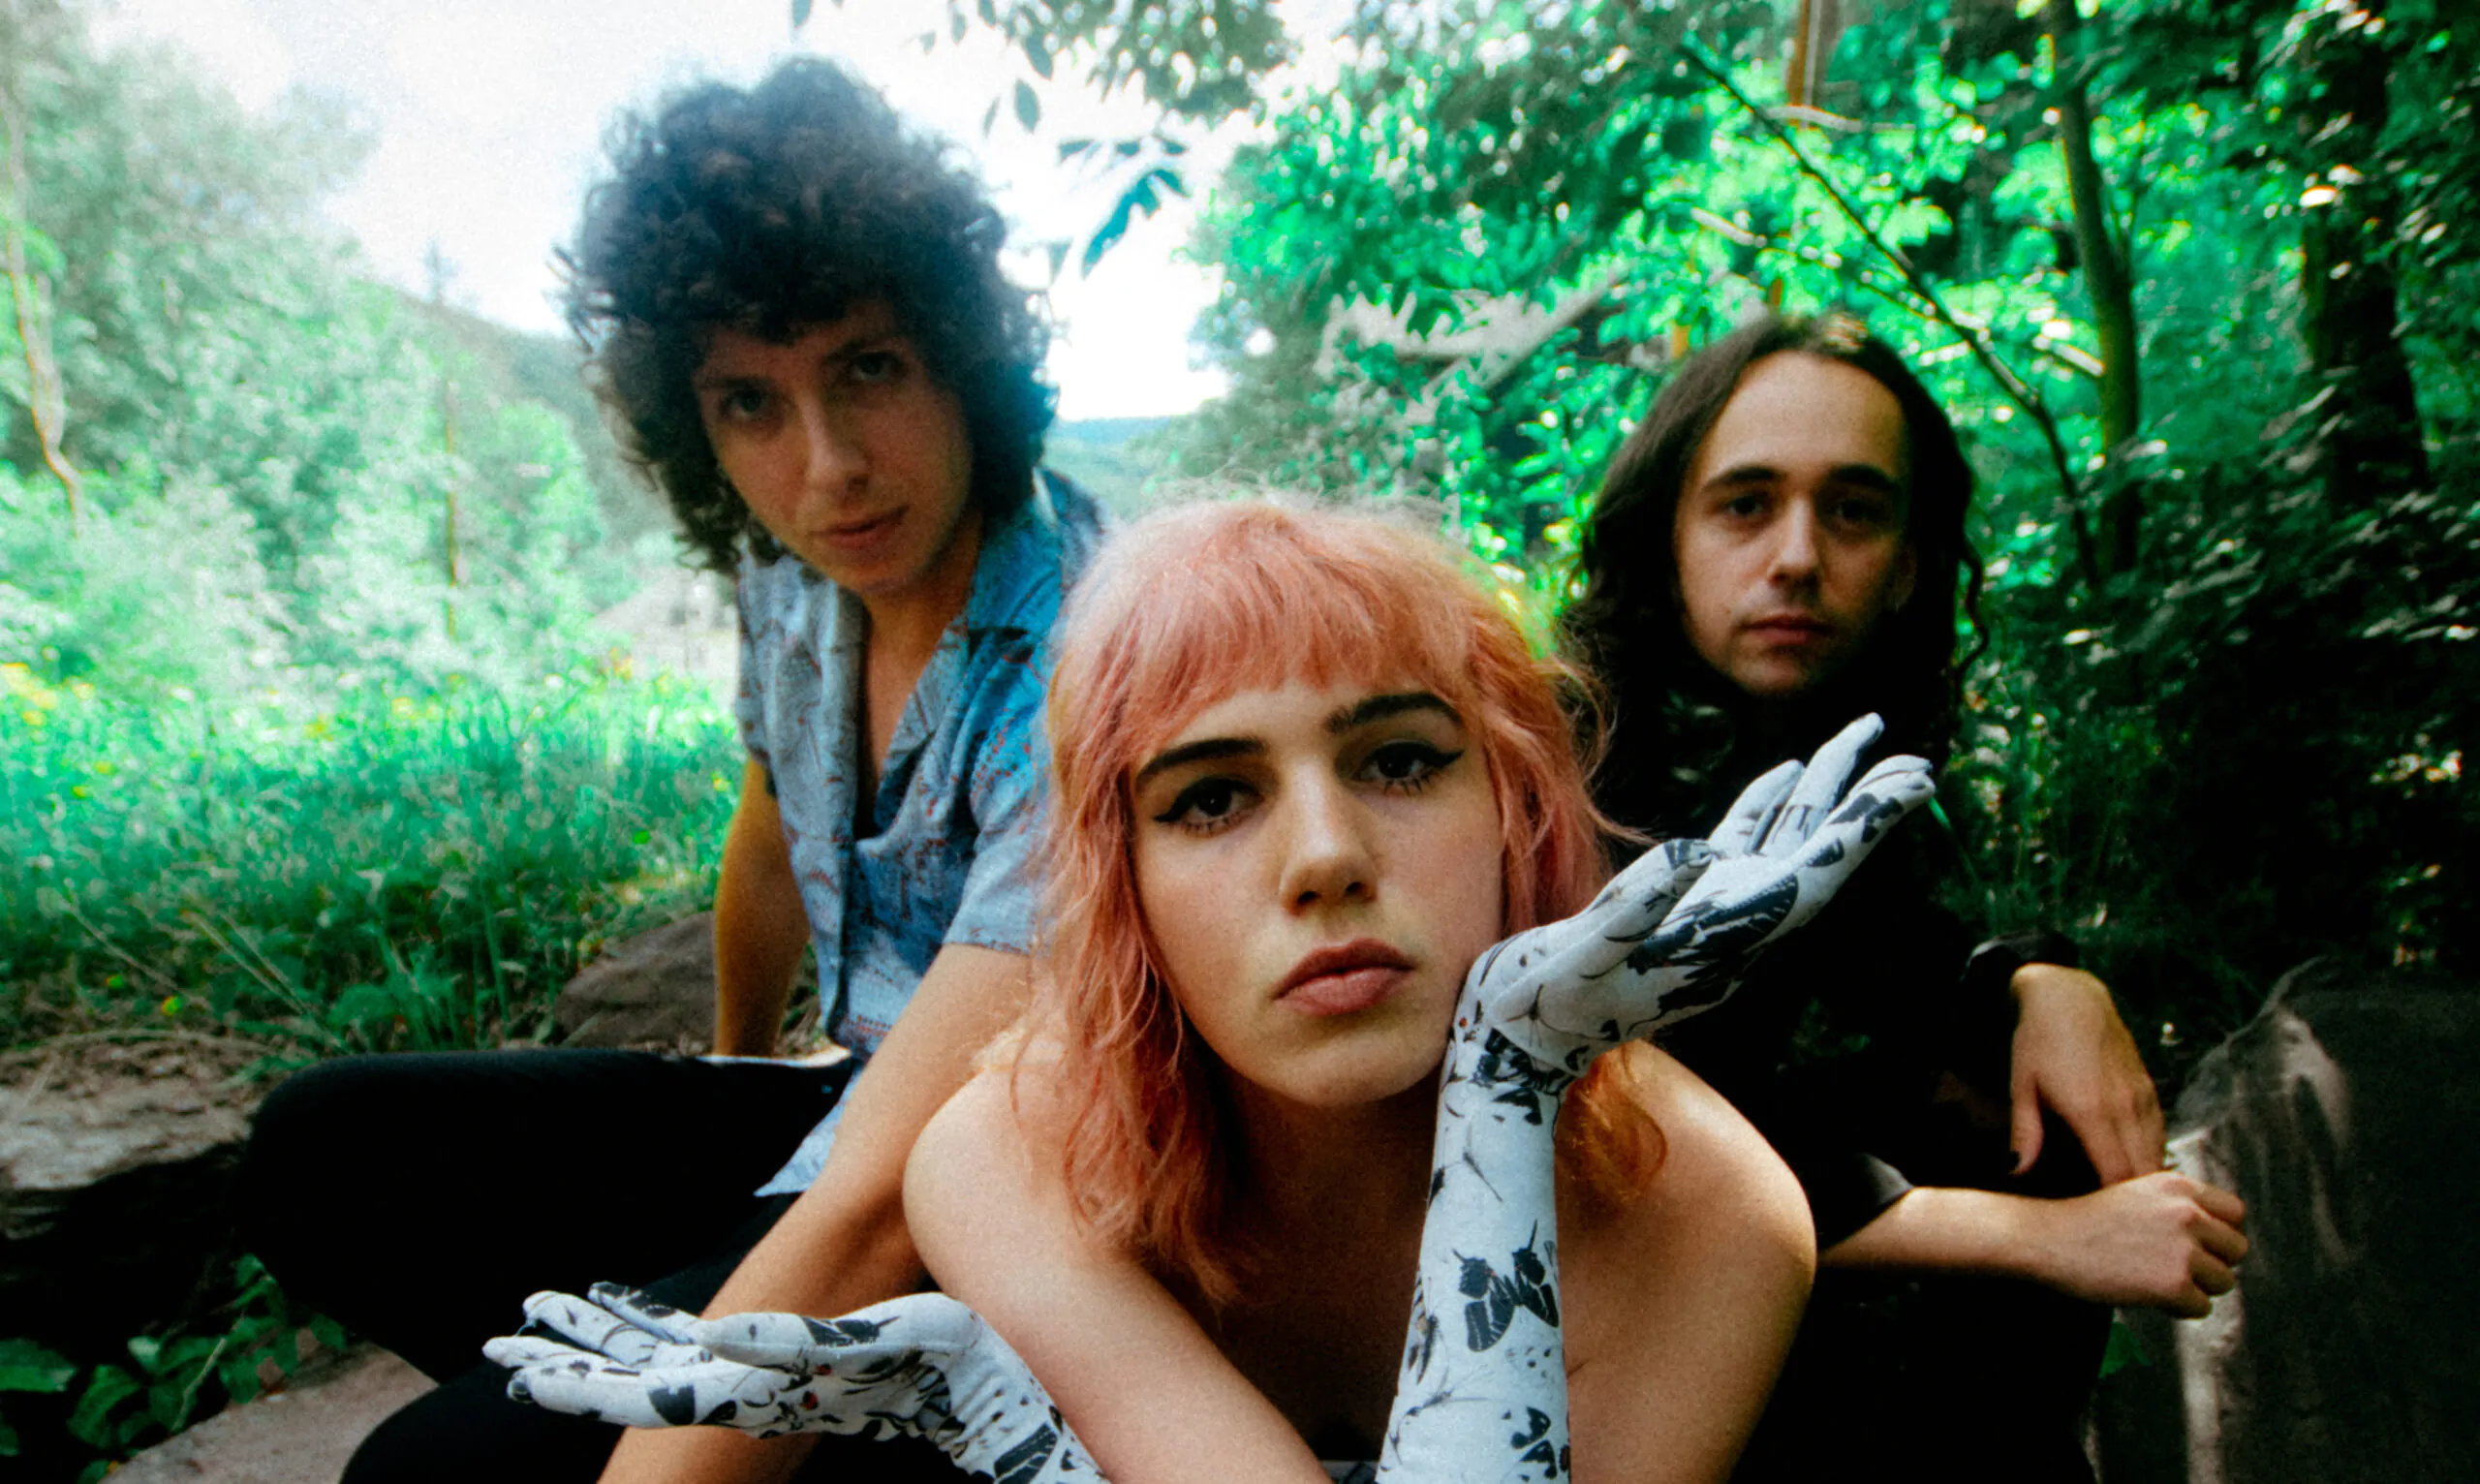 SUNFLOWER BEAN shares ‘Moment In The Sun’ their first new song & video of 2020